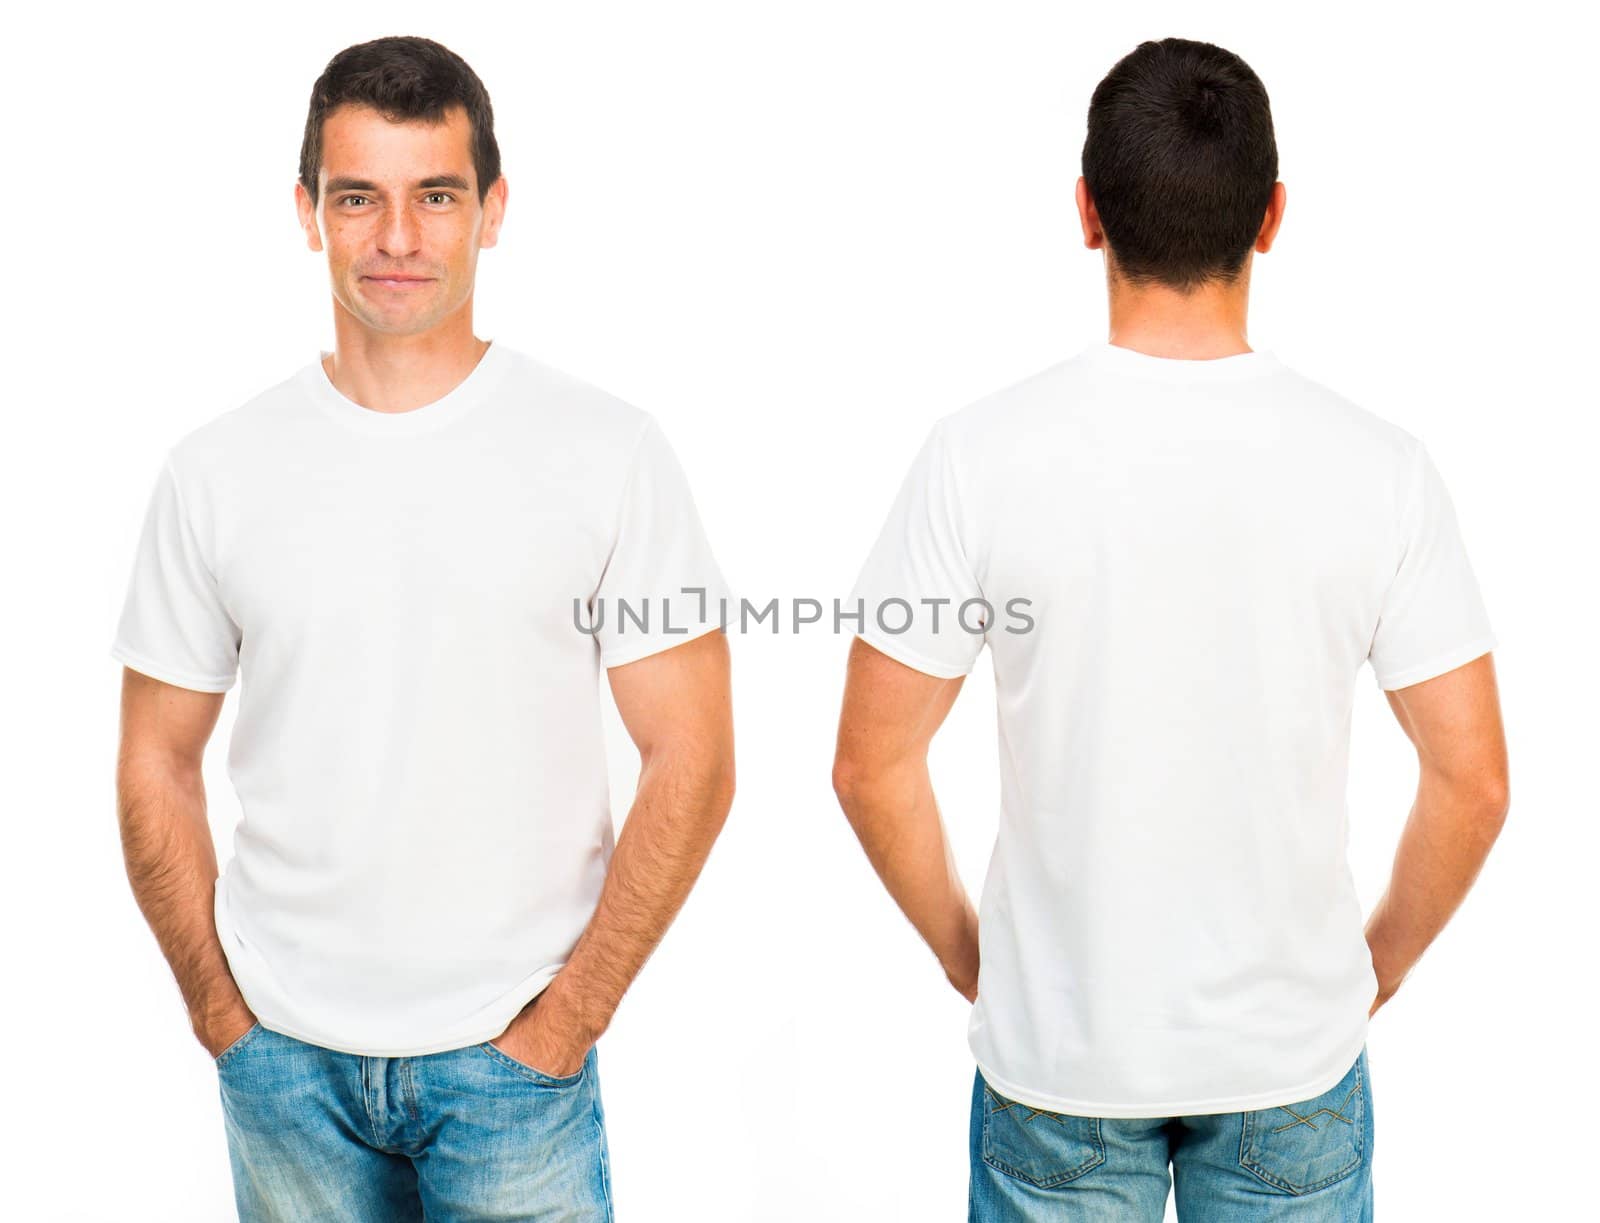 Teenager With Blank White Shirt by GekaSkr